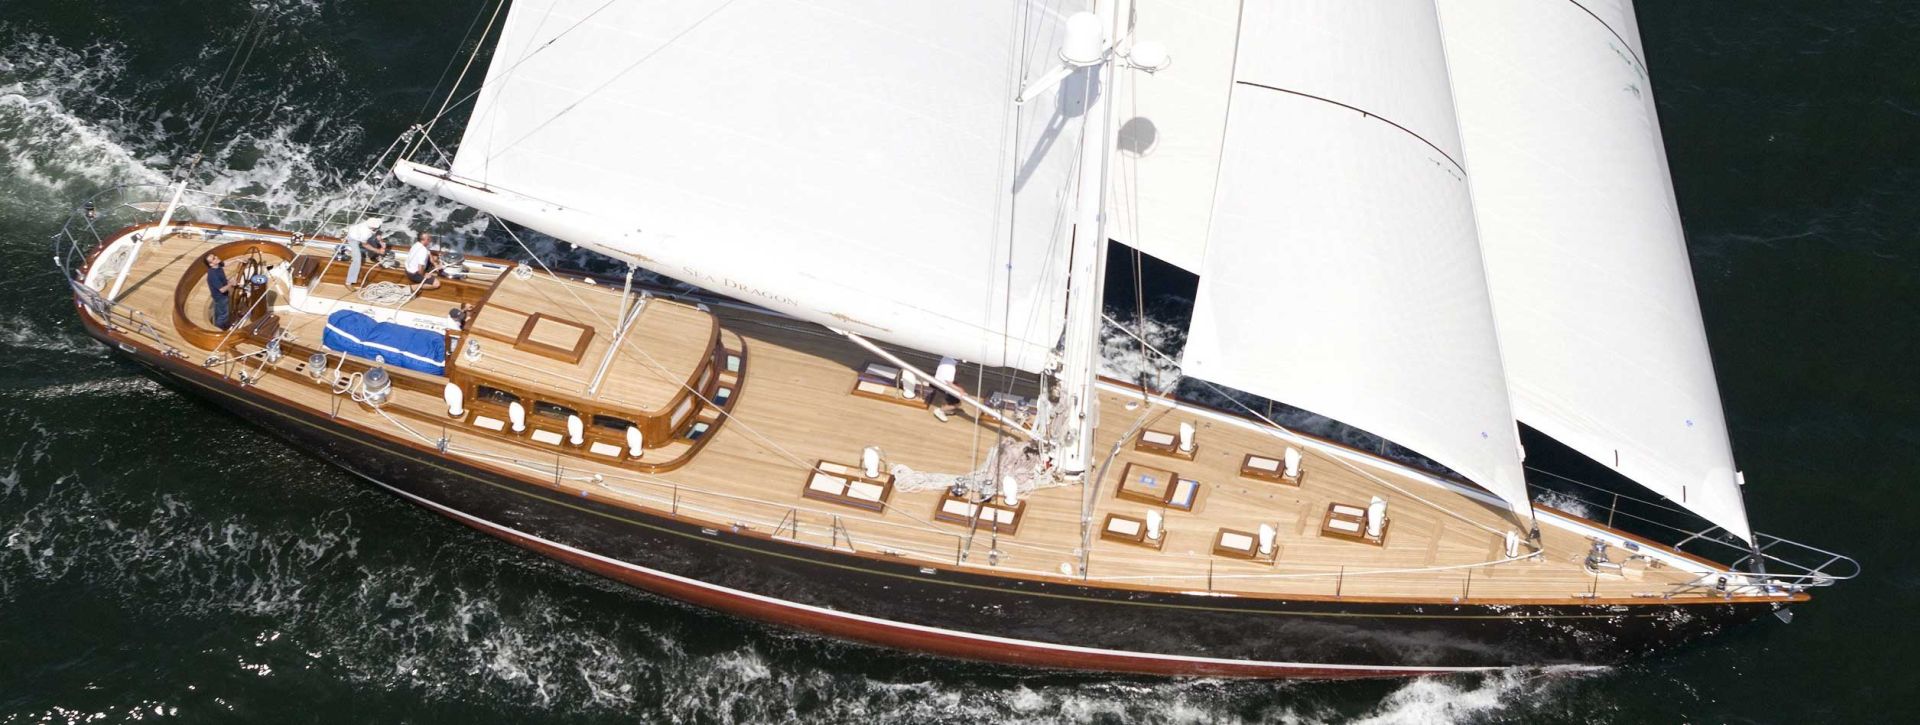 Aerial View of Teak Deck on Sailboat Photo